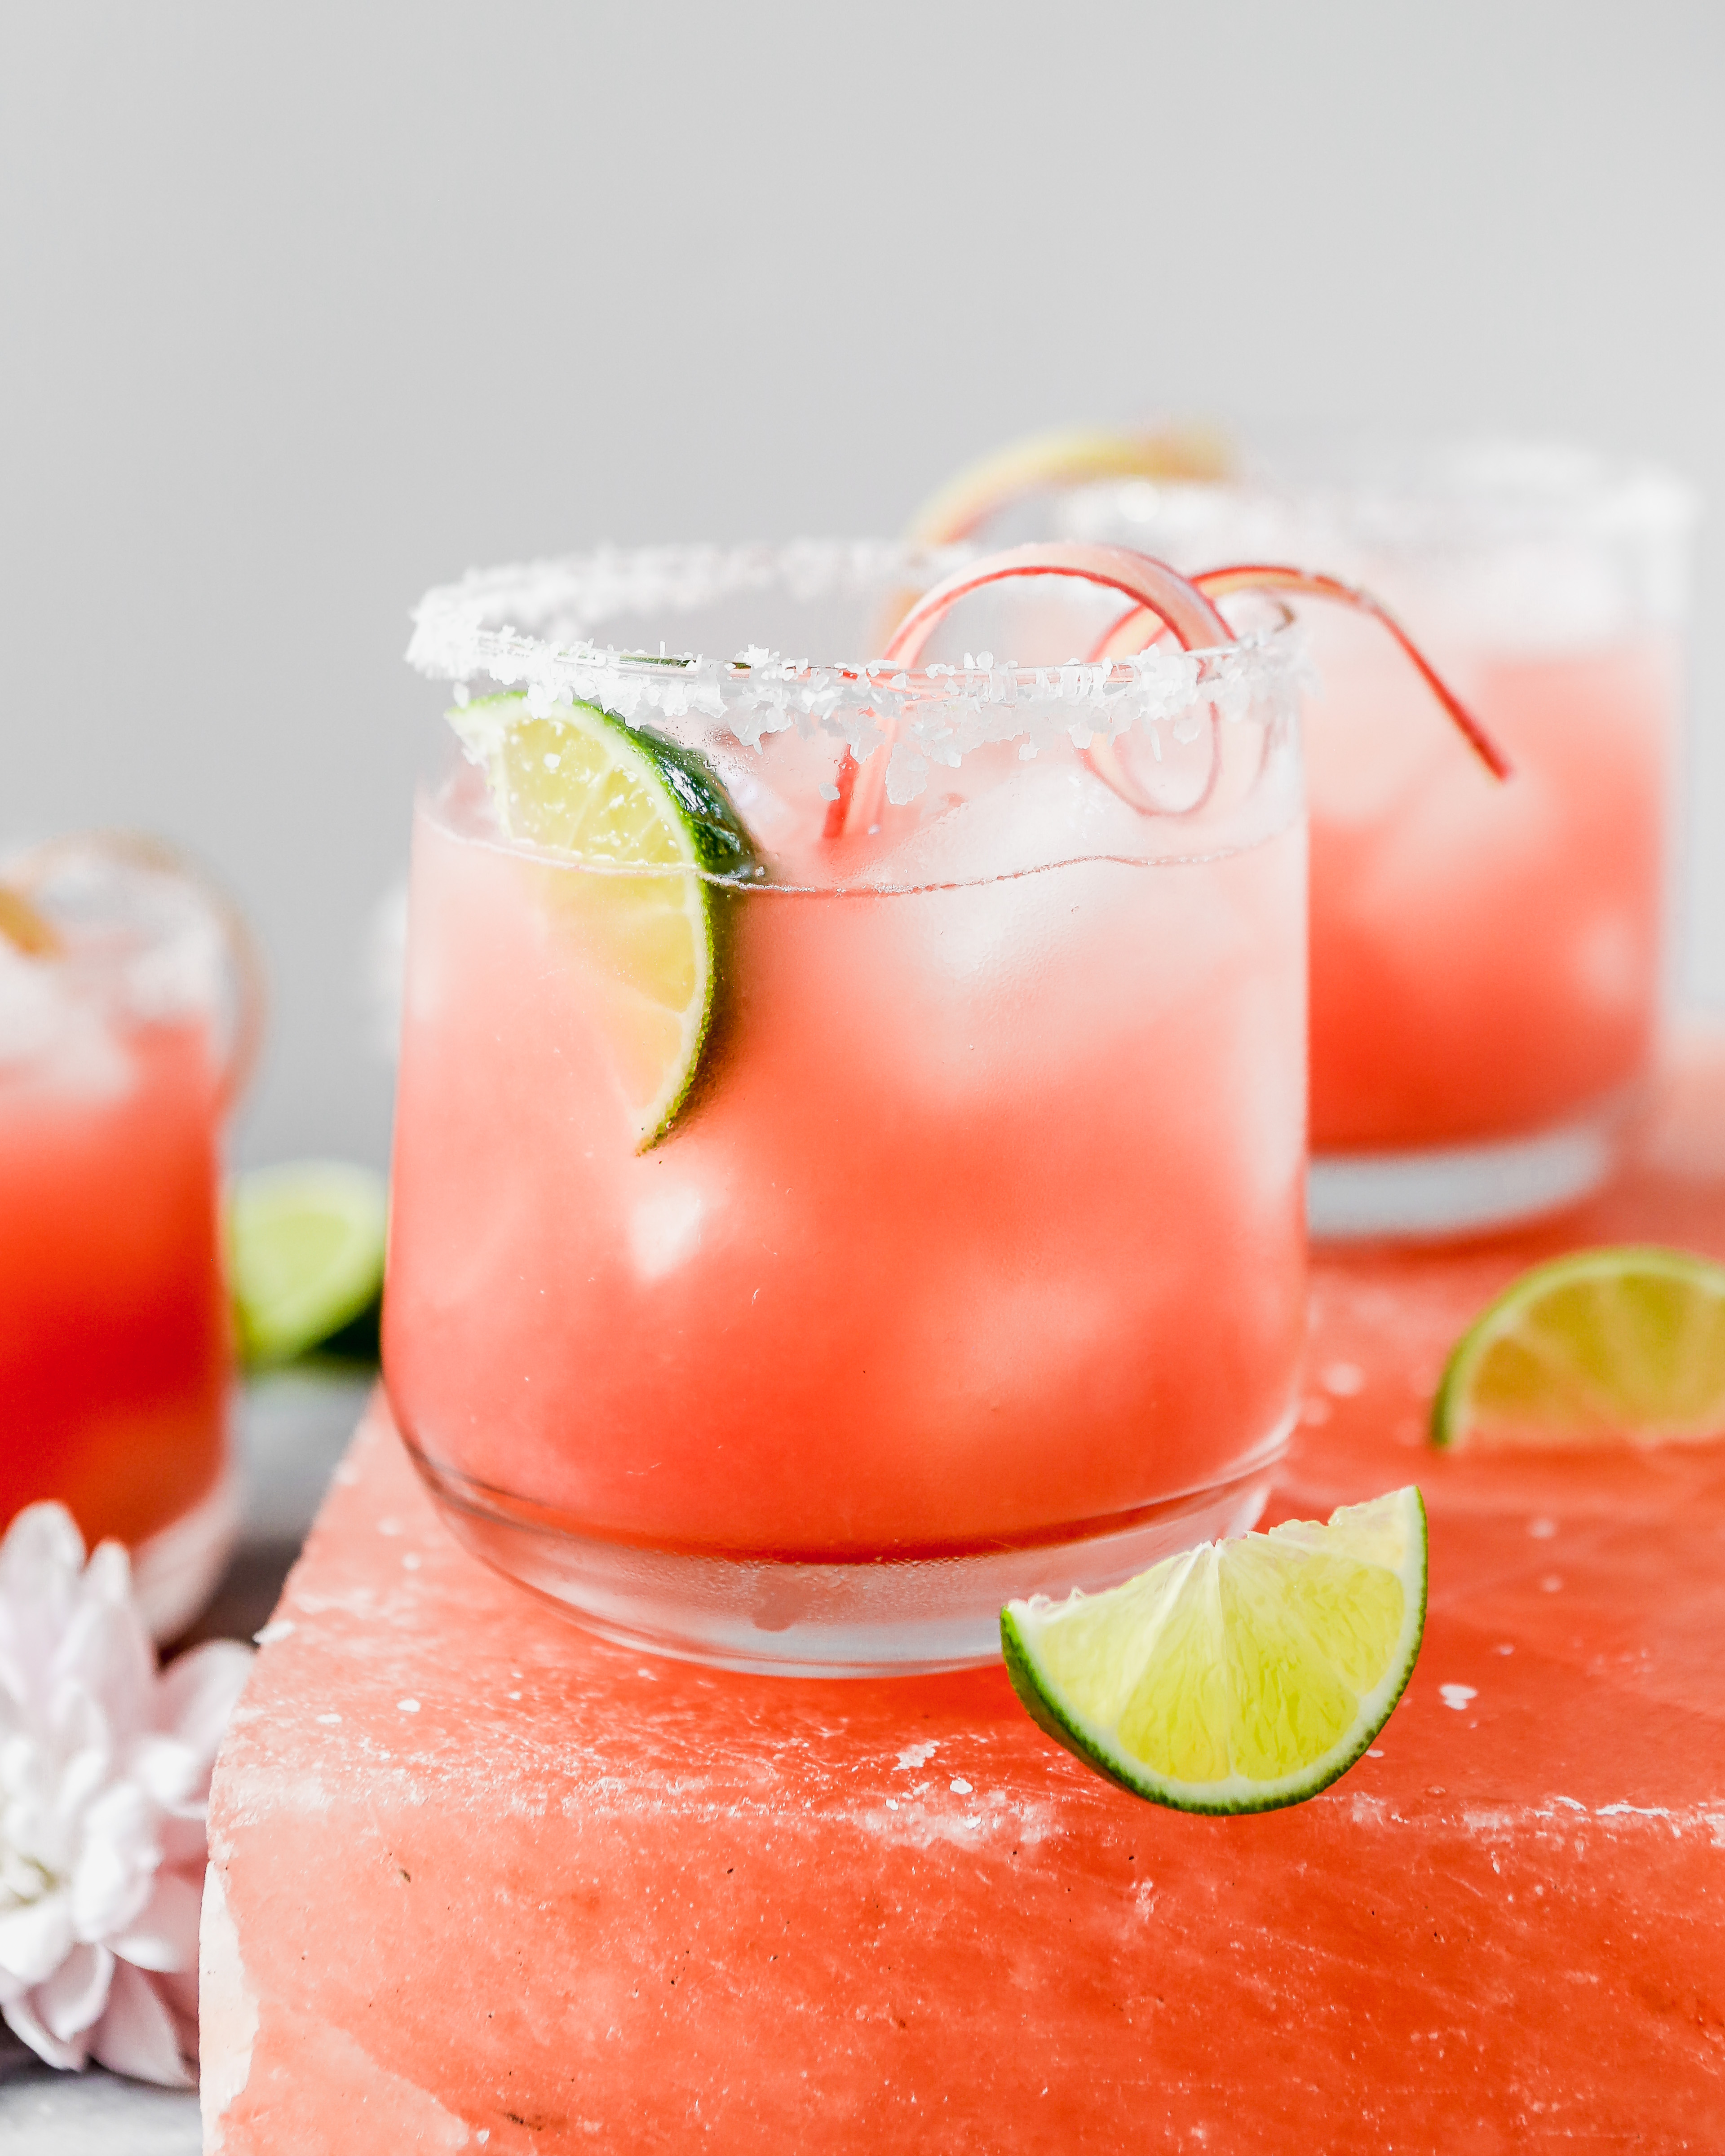 vibrant pink cocktail set on a pink salt block with lim wedges scattered around